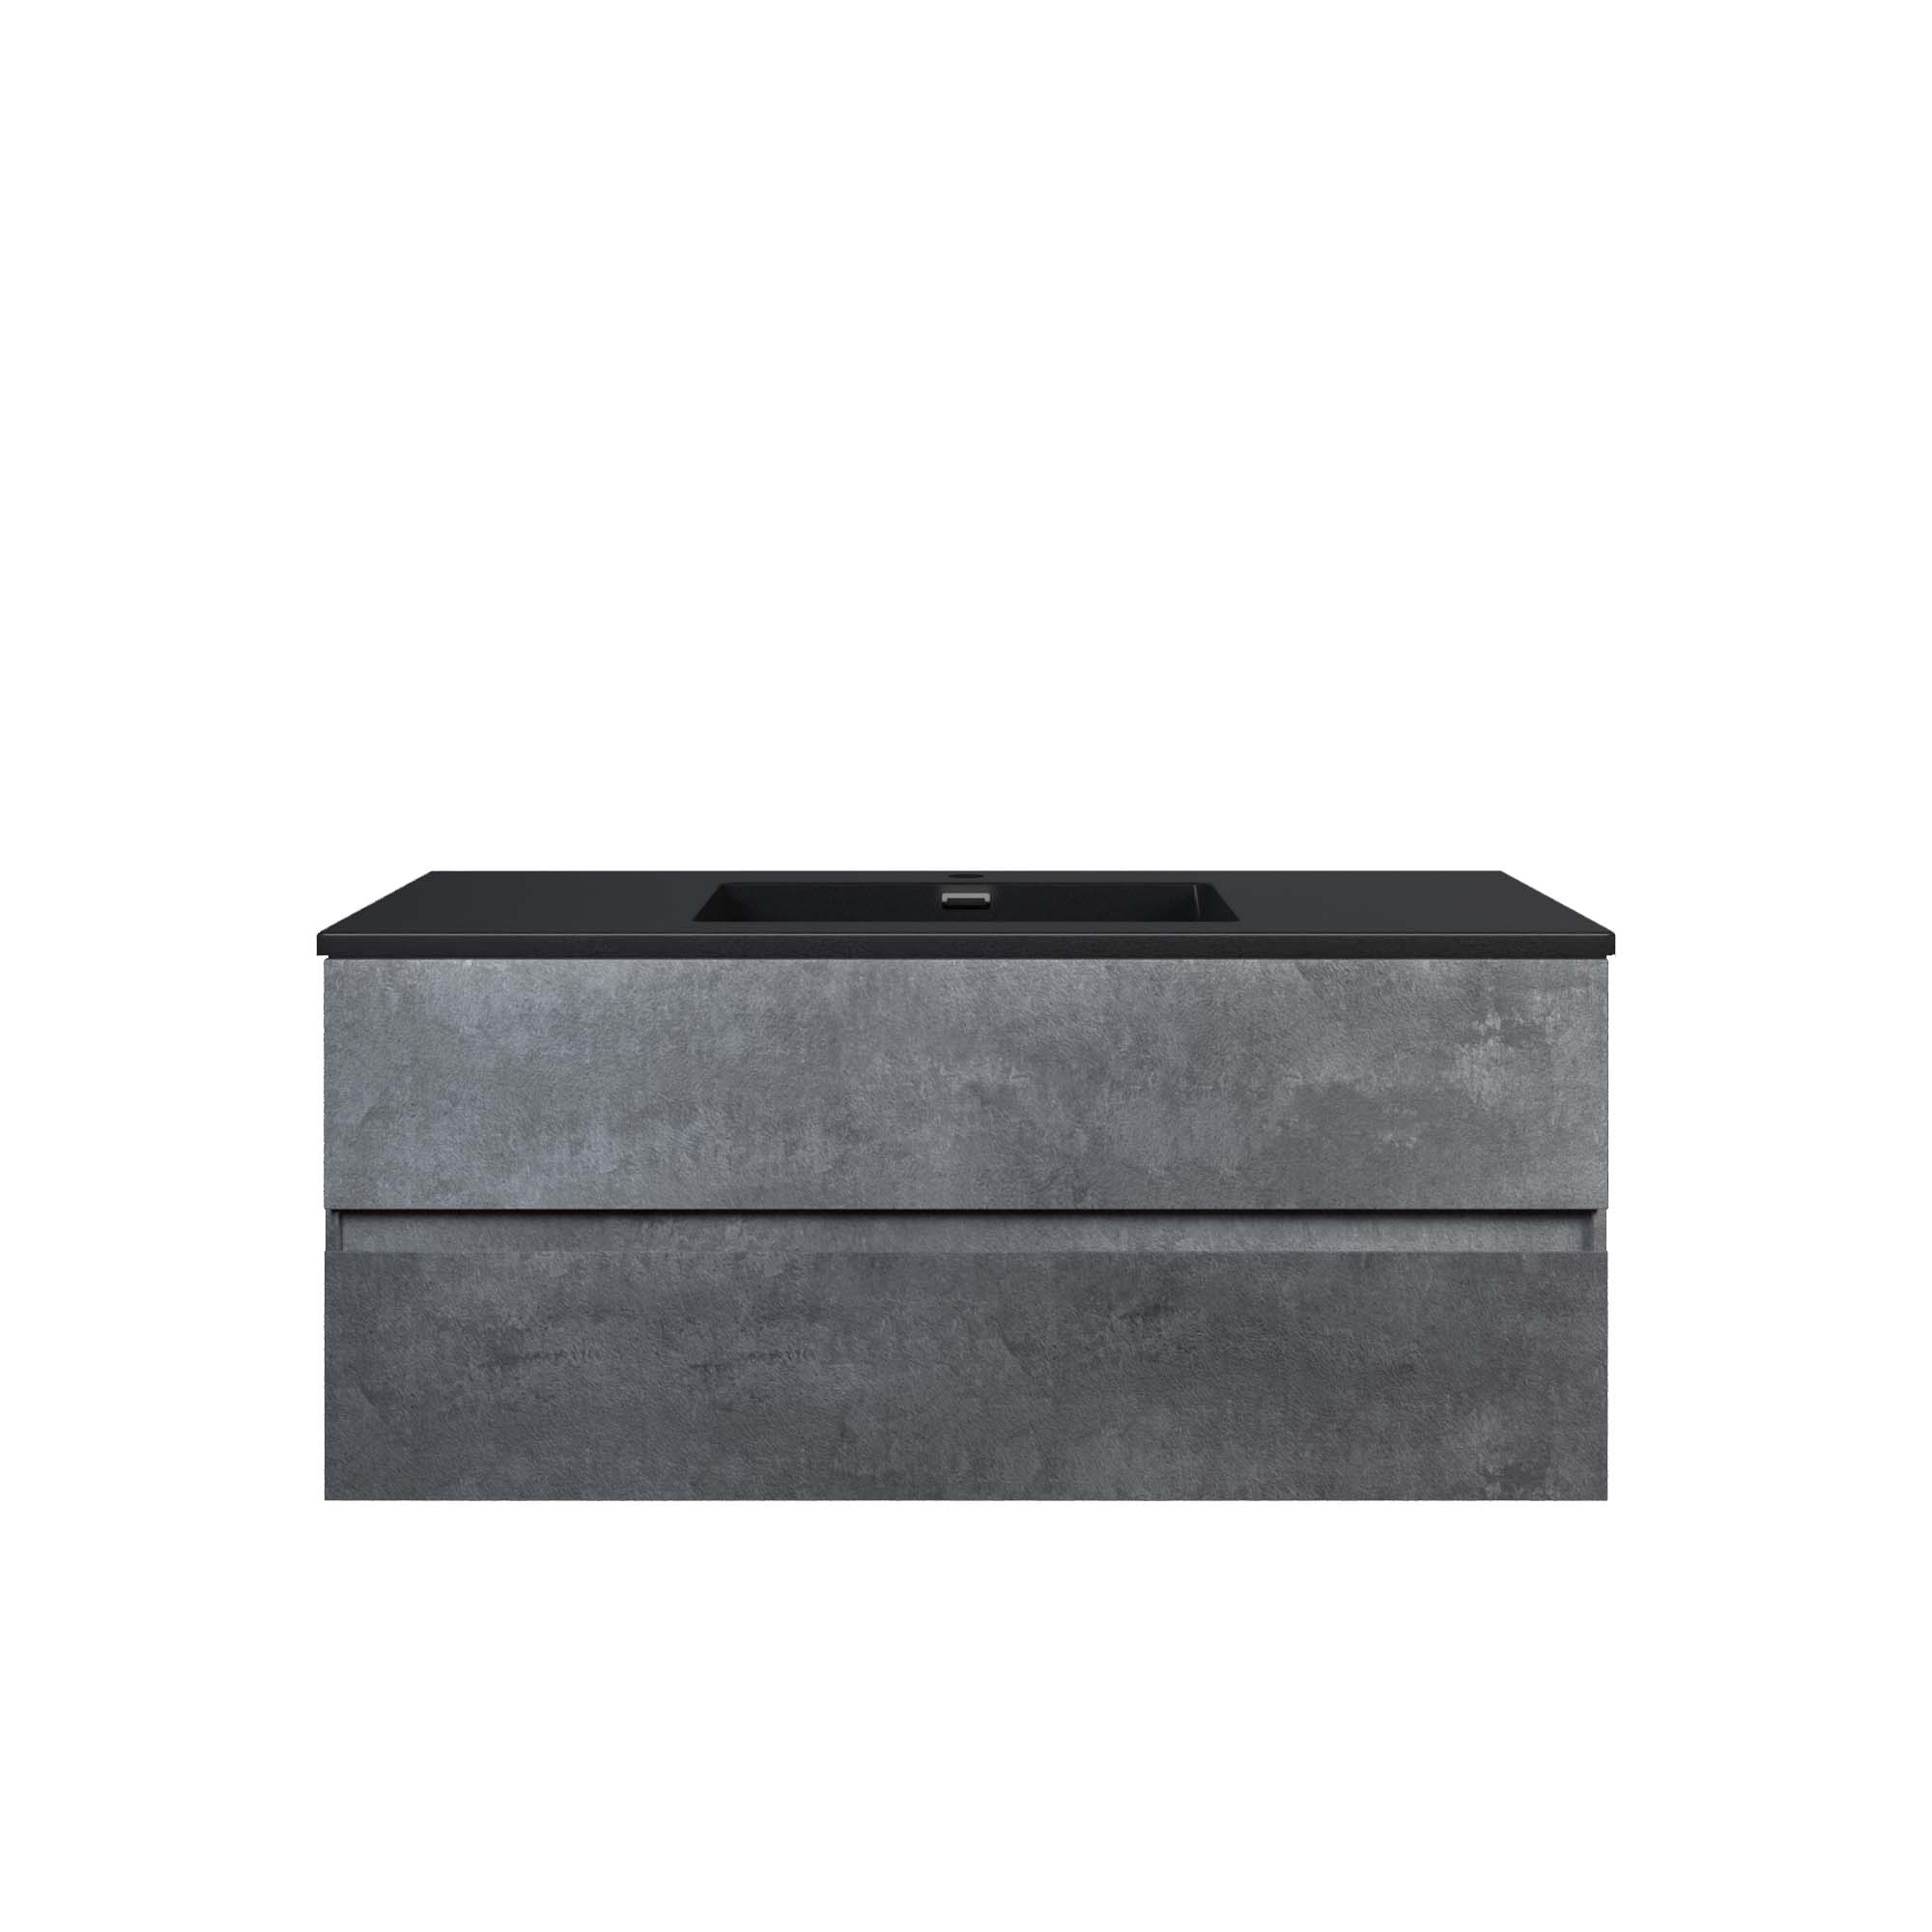  WOODBRIDGE 48 in. W x 18-7/8 in. D Contemporary Wall Hung Floating Vanity in Gray with Quartz Sand Composite Vanity Top in Black with matching finish sink._12675